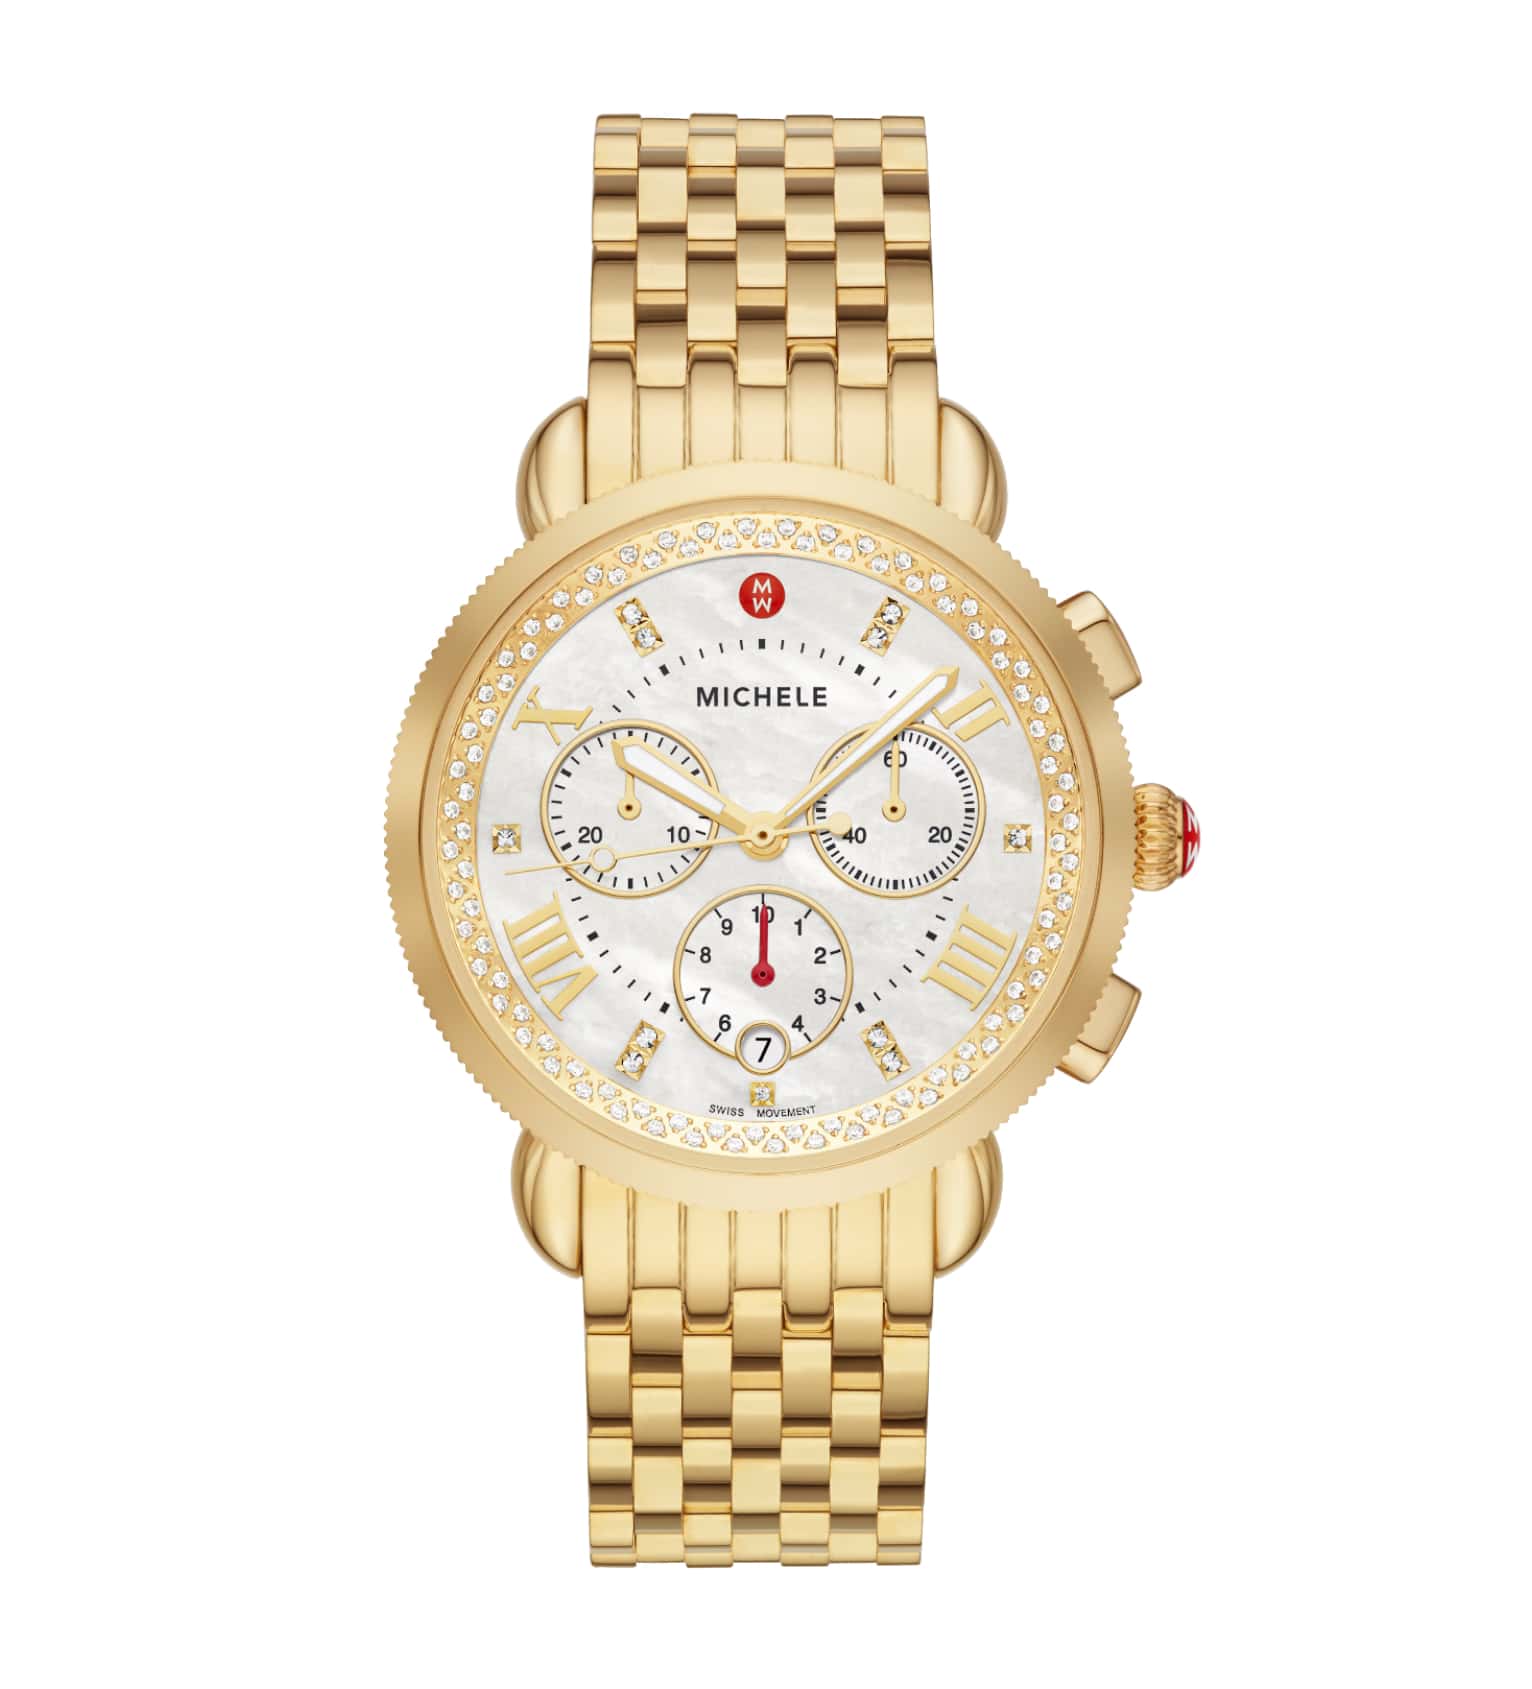 Sport Sail watch in 18K gold plating